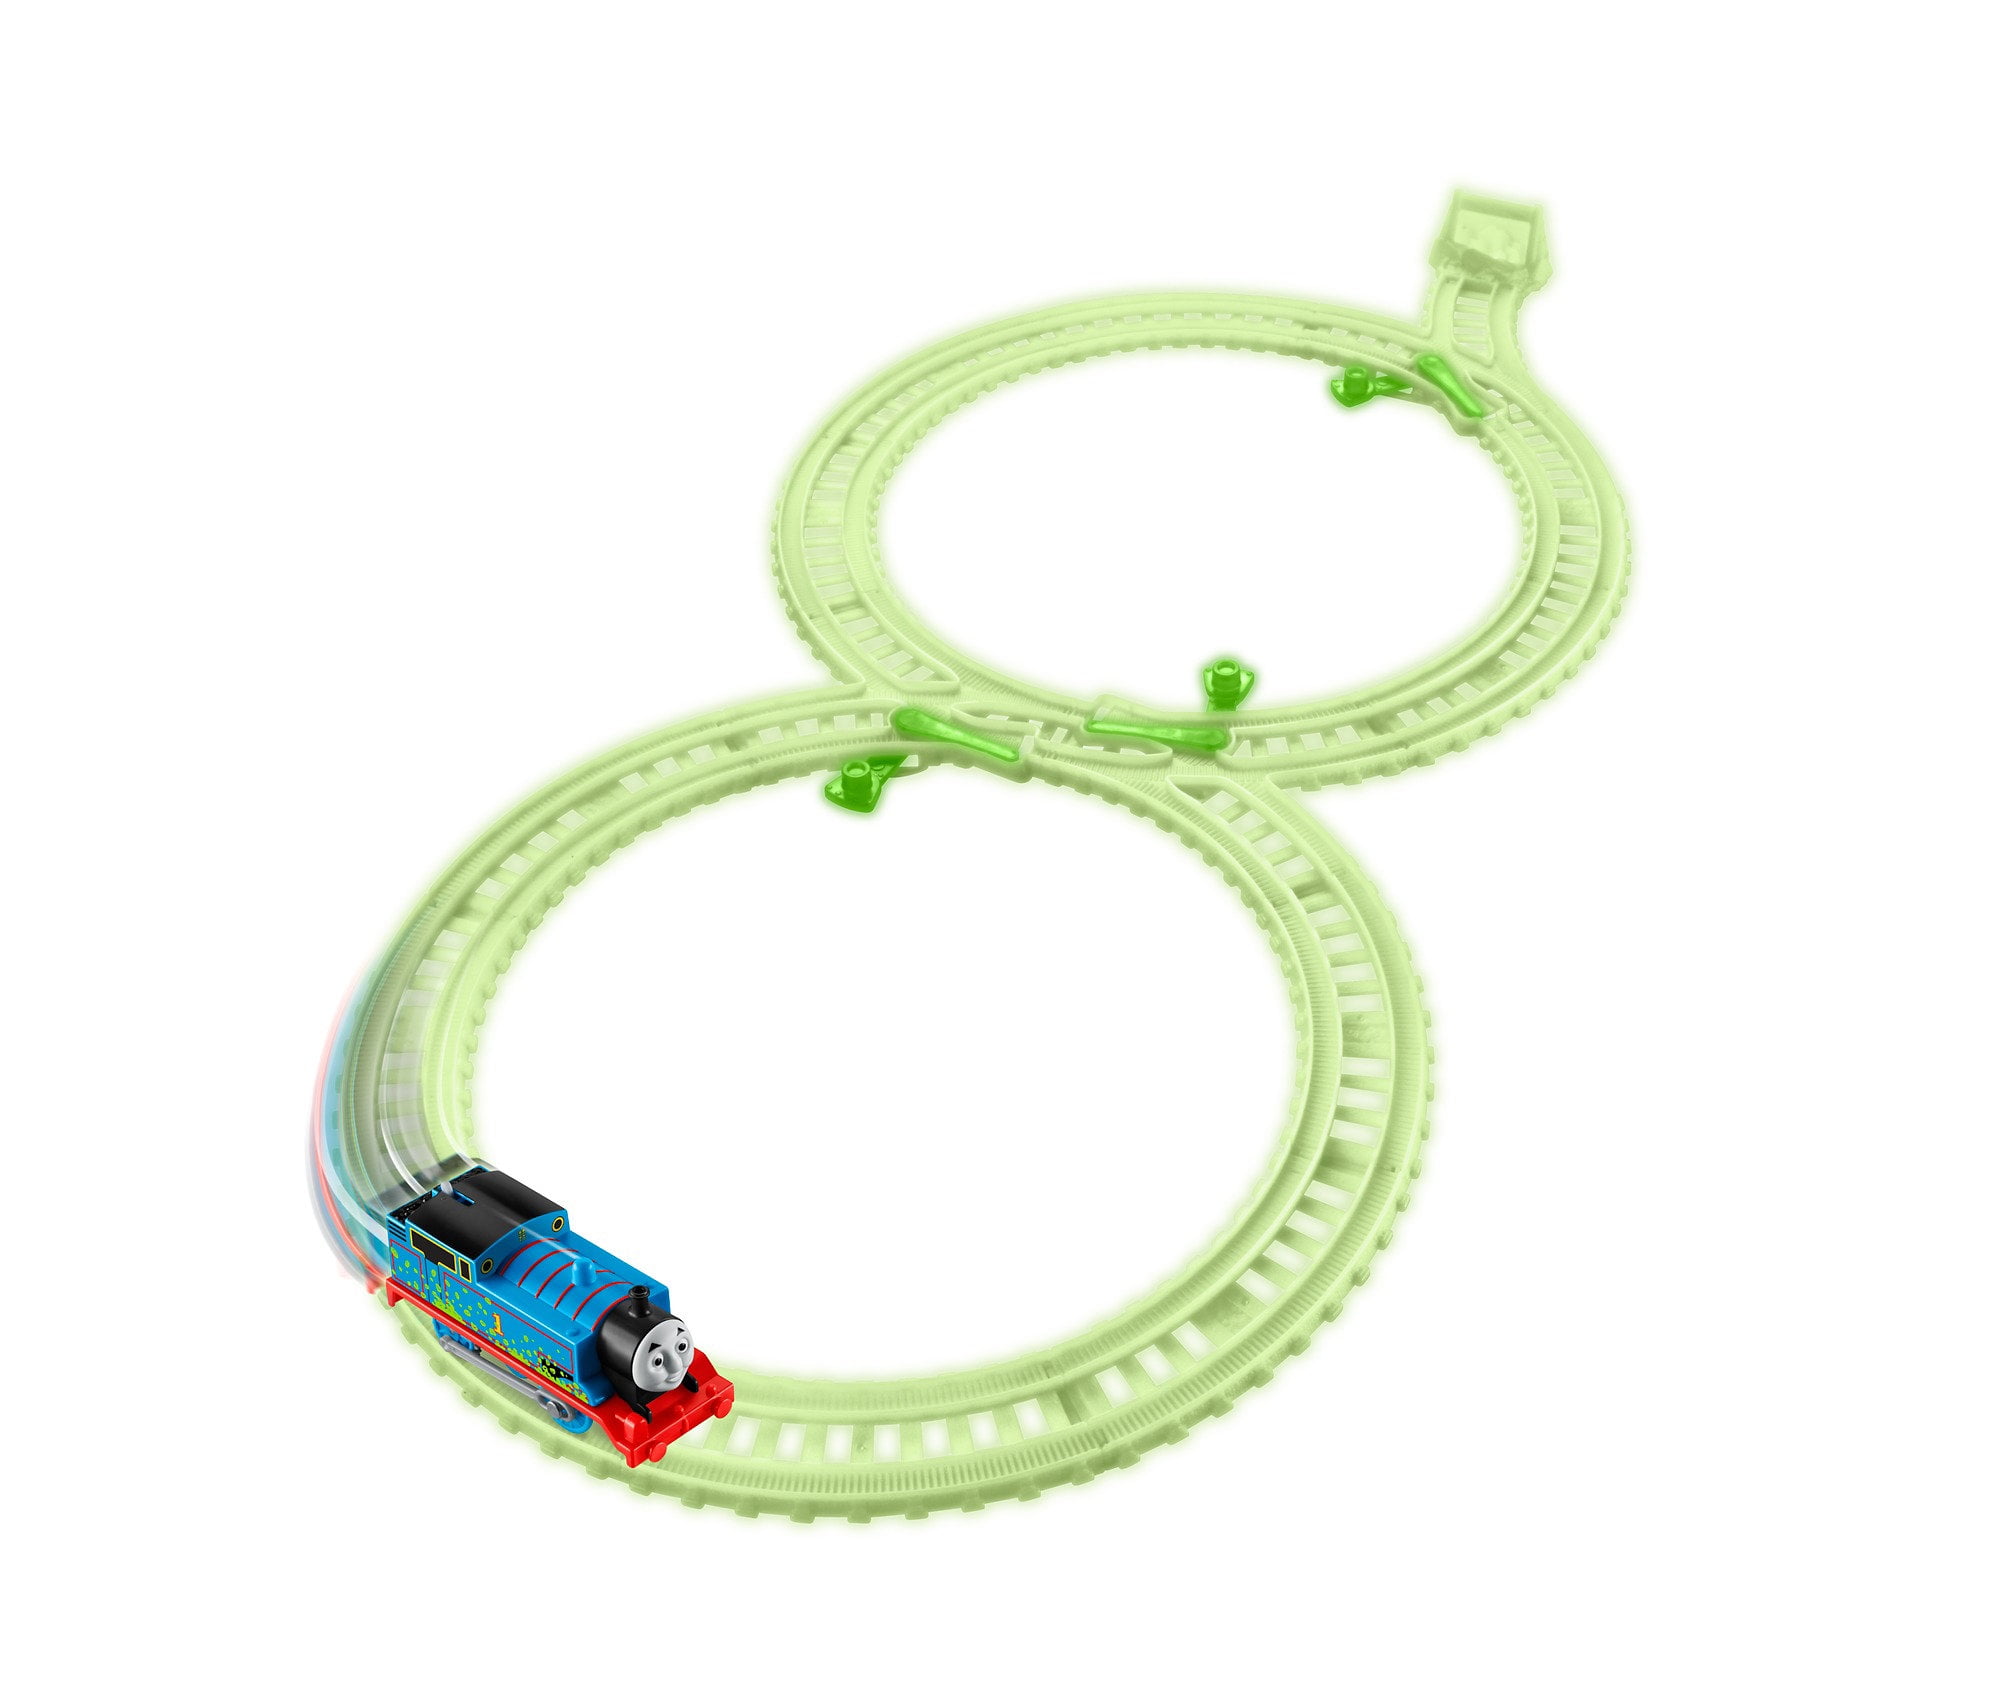 Thomas & Friends Trackmaster Tan Complete Track Switches Straight Curves Mattel 